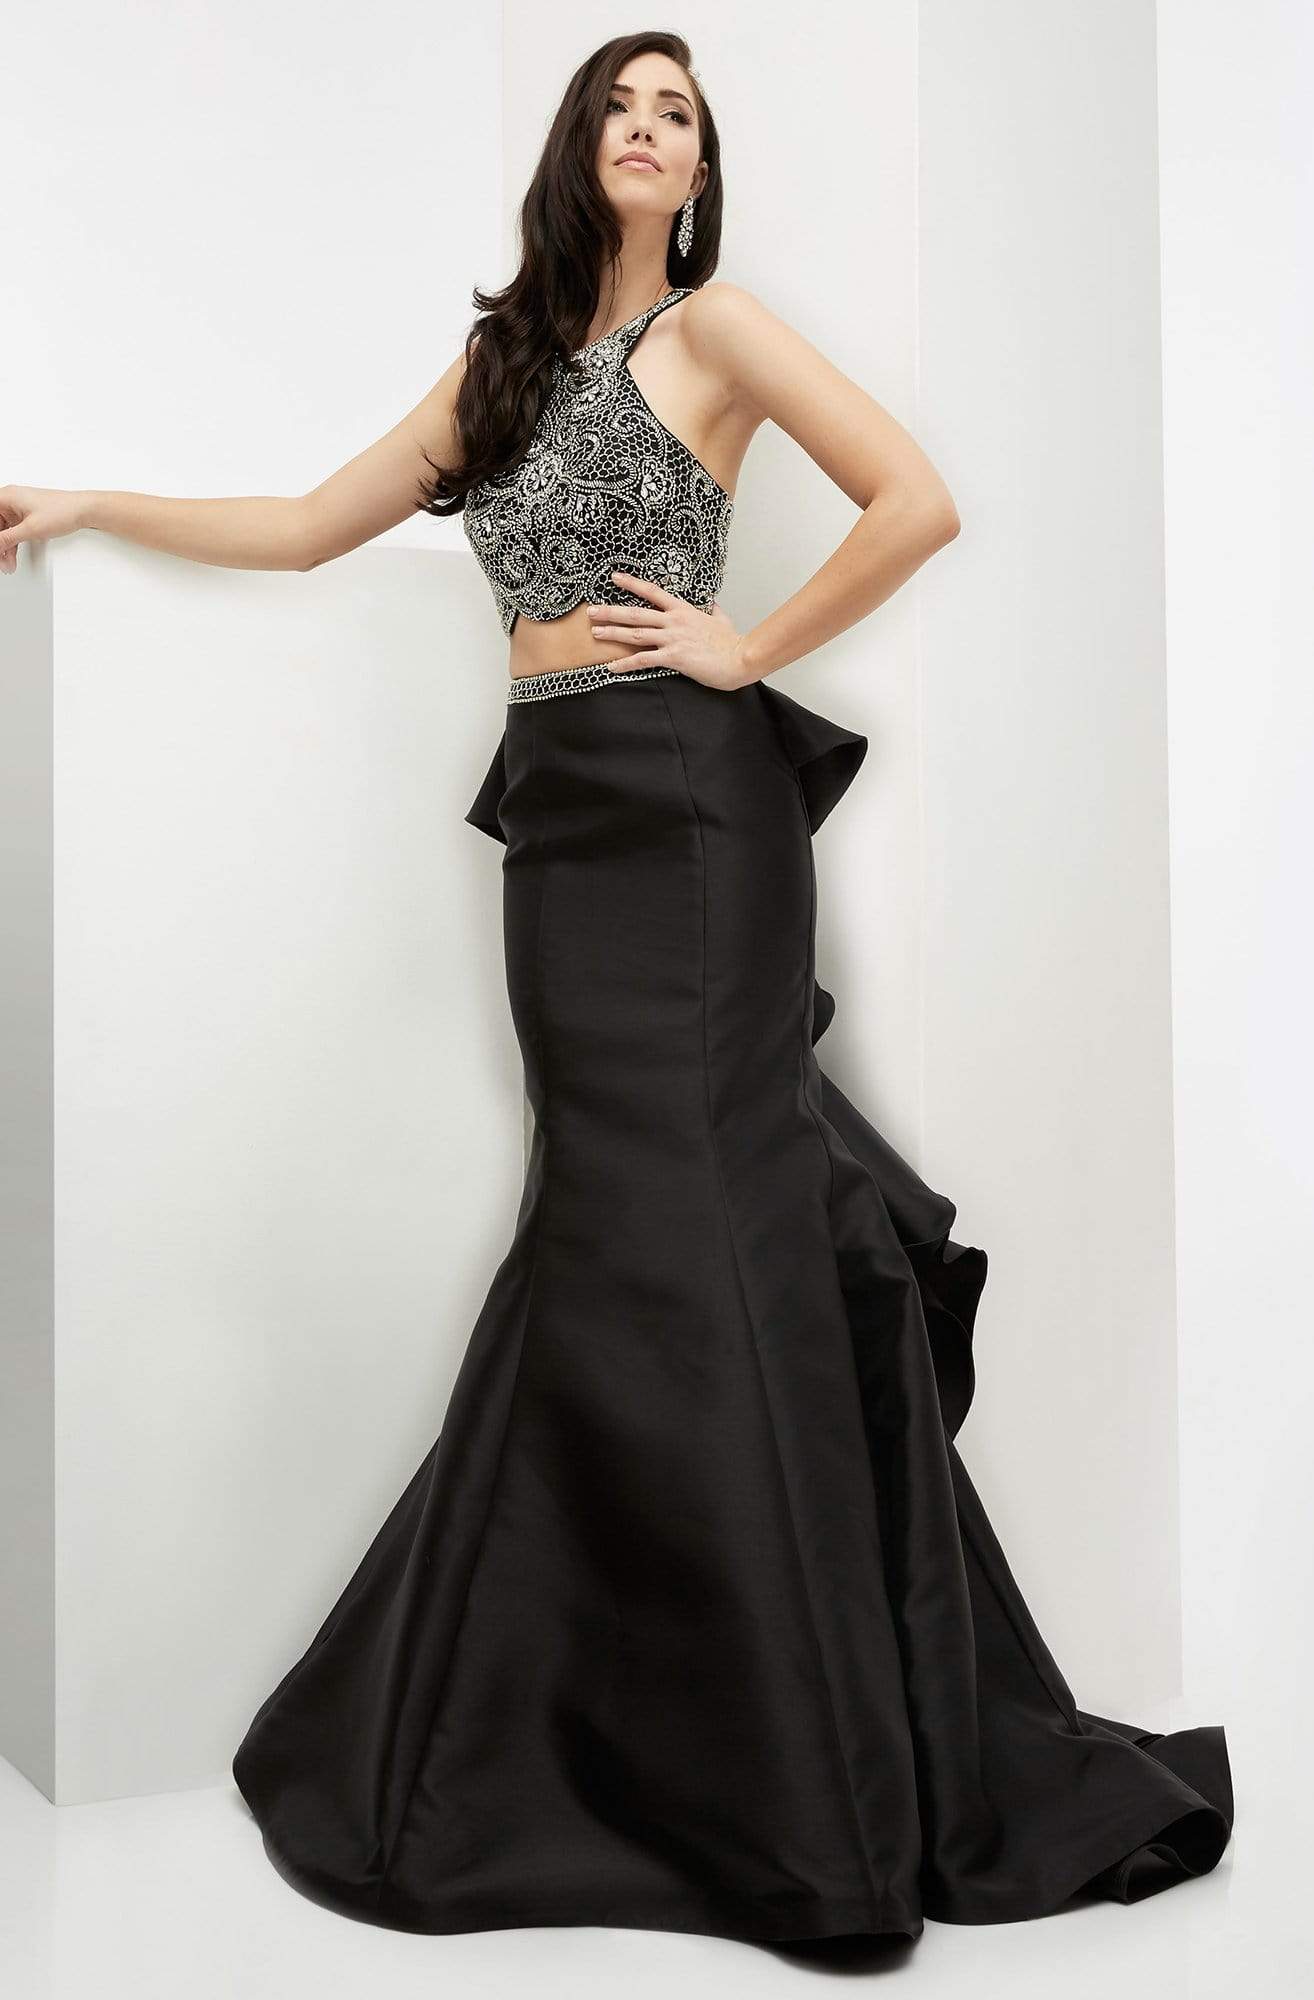 Jasz Couture - Ruffled Panel Trumpet Gown 5990 Special Occasion Dress 0 / Black